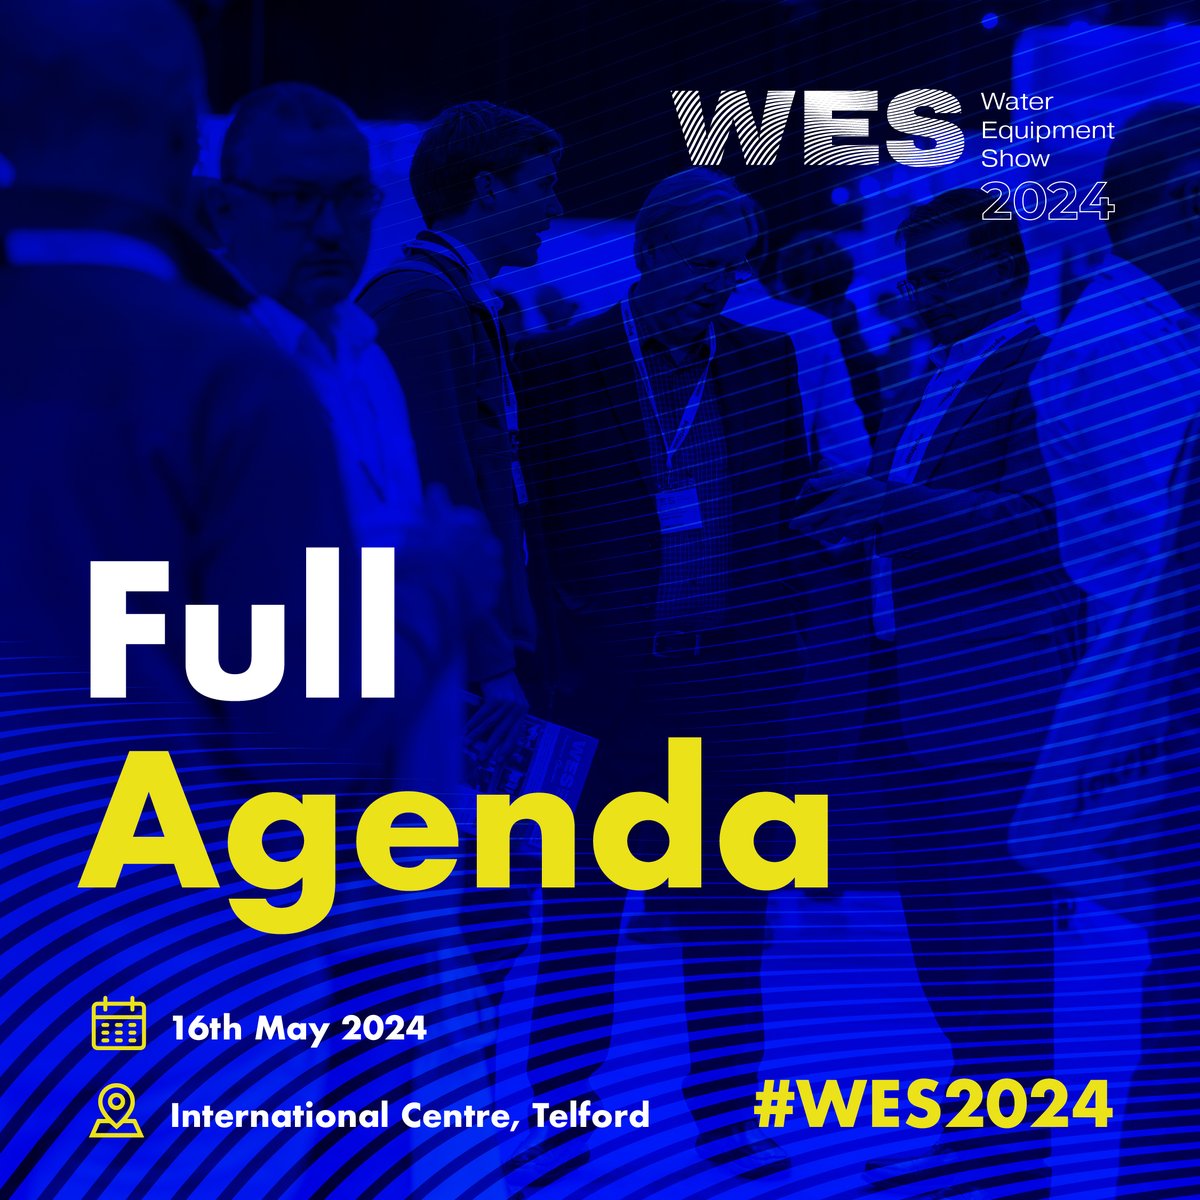 The agenda for #WES2024 is packed with an incredible lineup of experts delivering presentations on industry leading topics in the #WaterIndustry! 

Register for the industry event of the year today: bit.ly/WES24_Register…

View the agenda here: ow.ly/YWh650Riilj